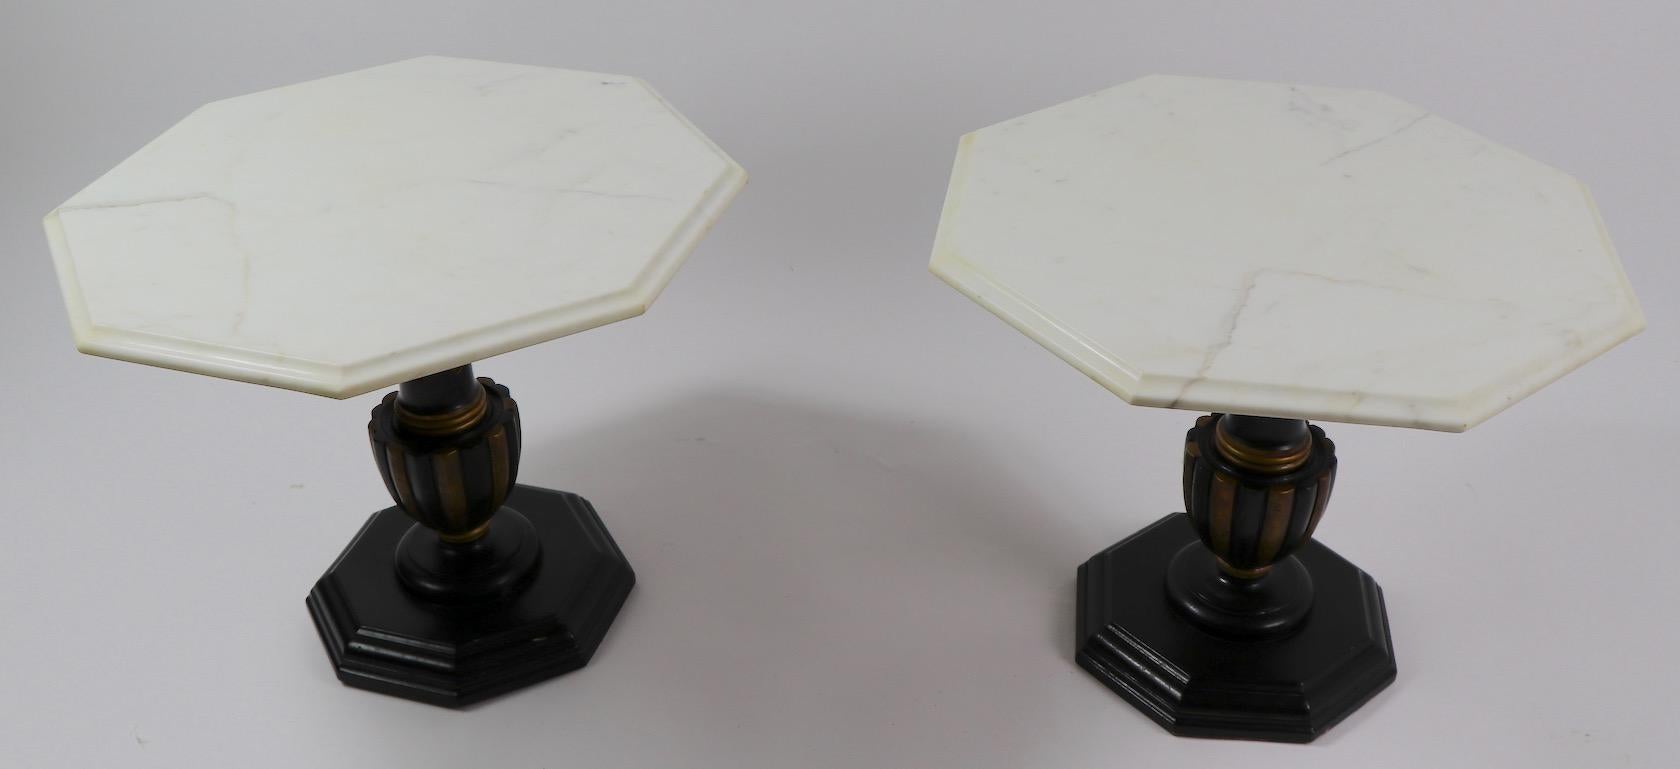 Polychromed Pair Italian Marble Top Tables with Polychrome Bases